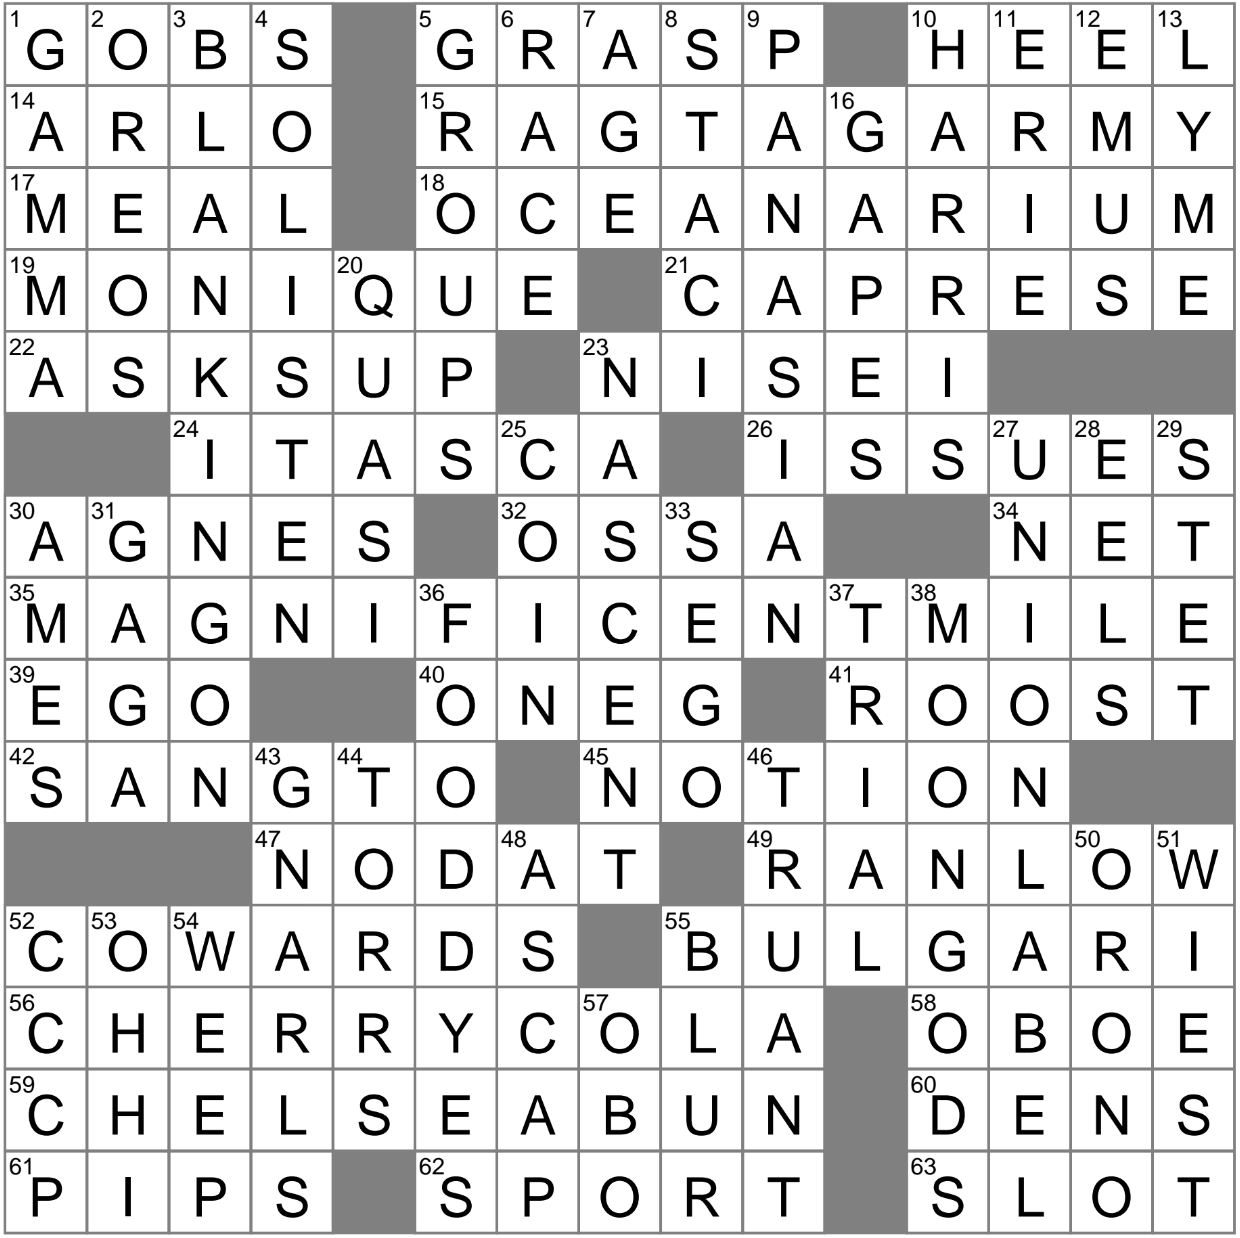 Local information source? crossword clue Archives LAXCrossword com